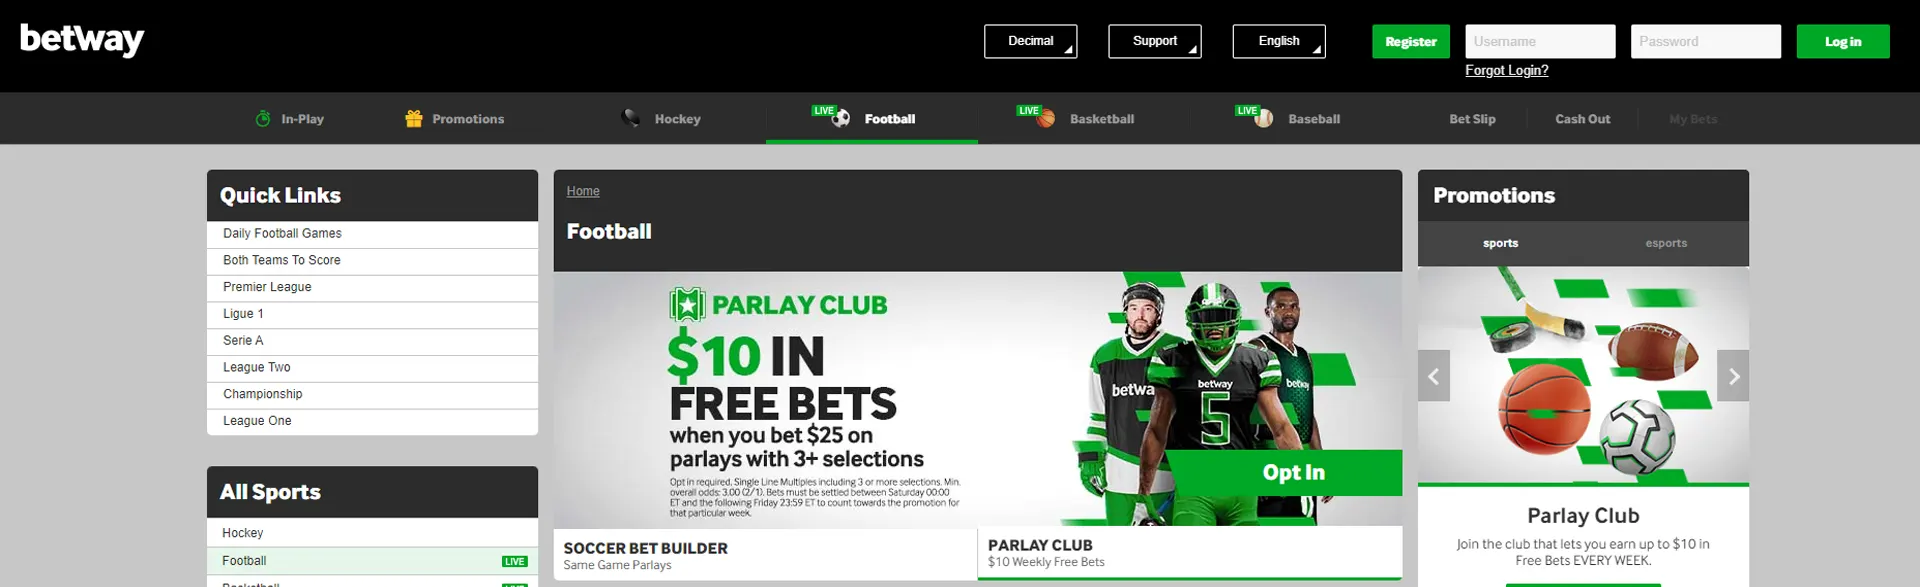 The Betway football page promotions and offers for betting.